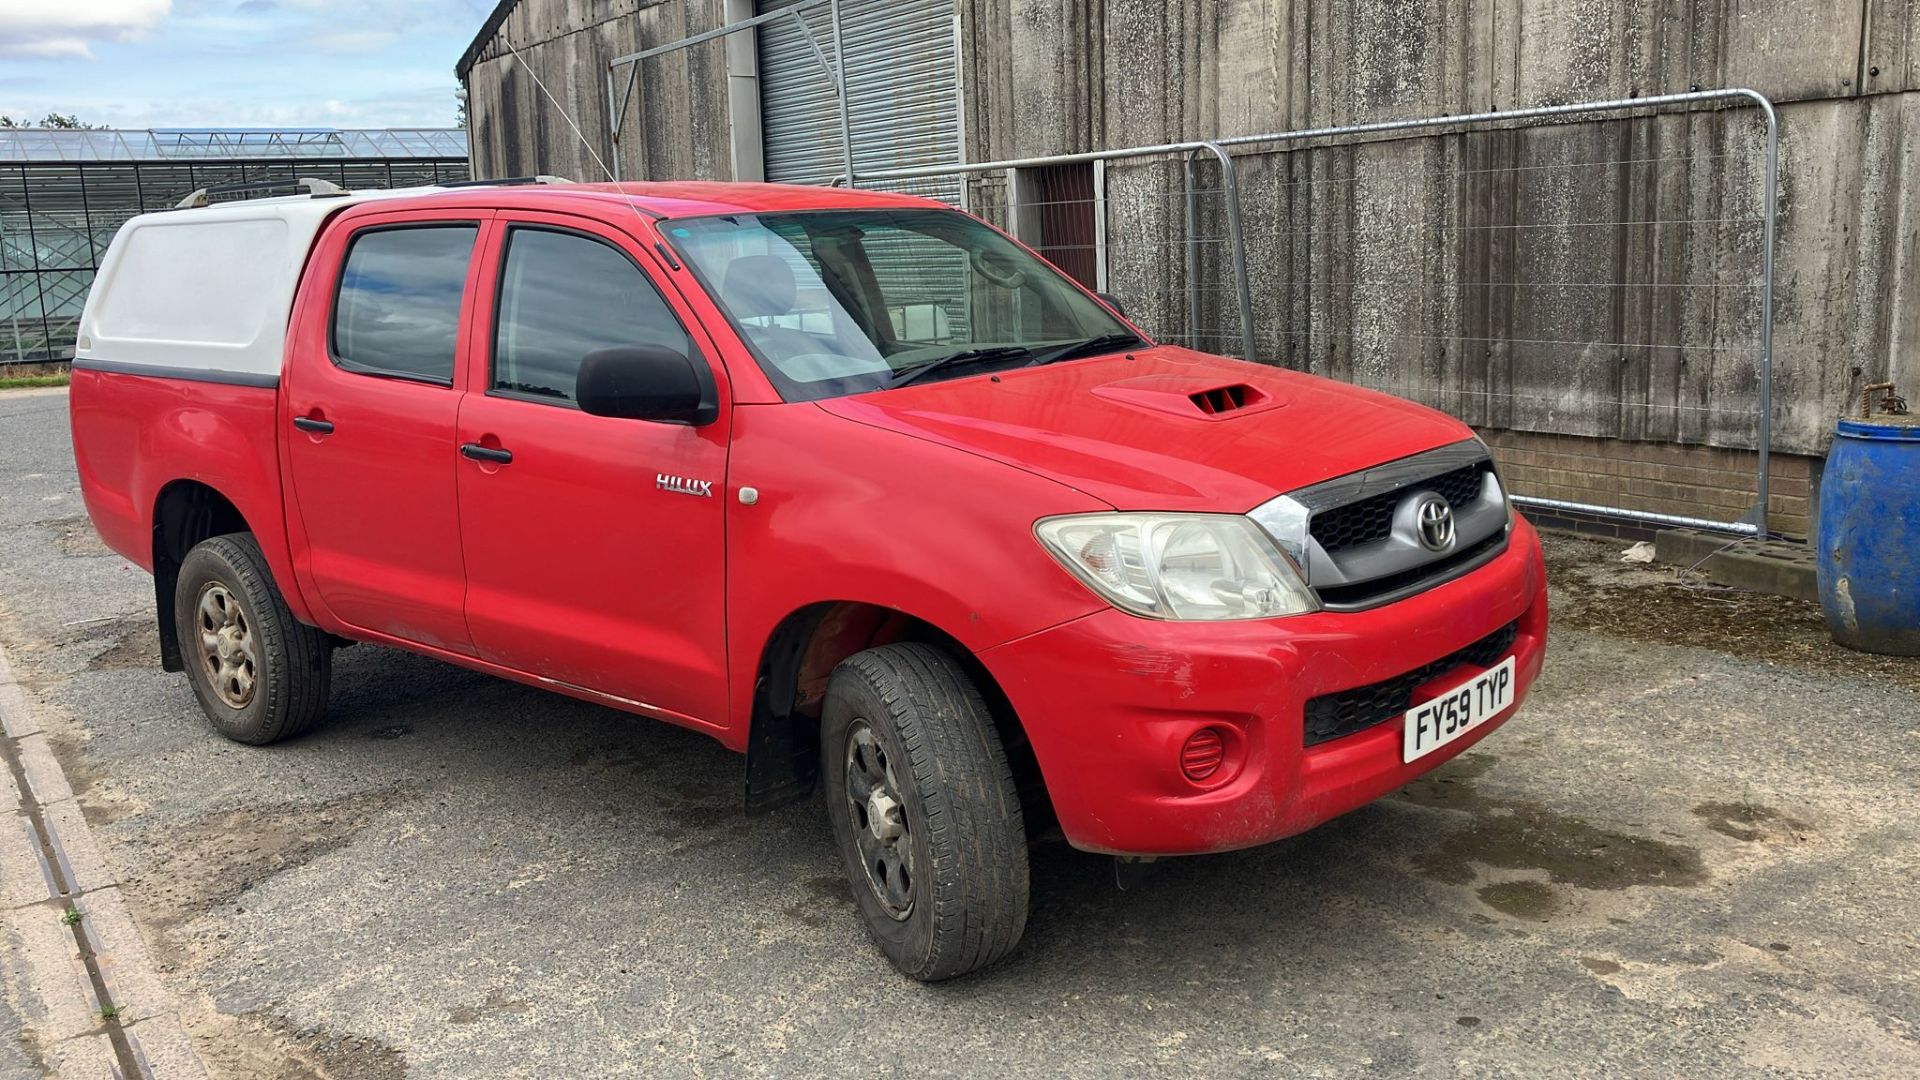 (09) Toyota Hi Lux HLZ double cab pick up, Red, MaxTop Liner, Reg FY59 TYP, MOT 11 Oct 24, 250,406